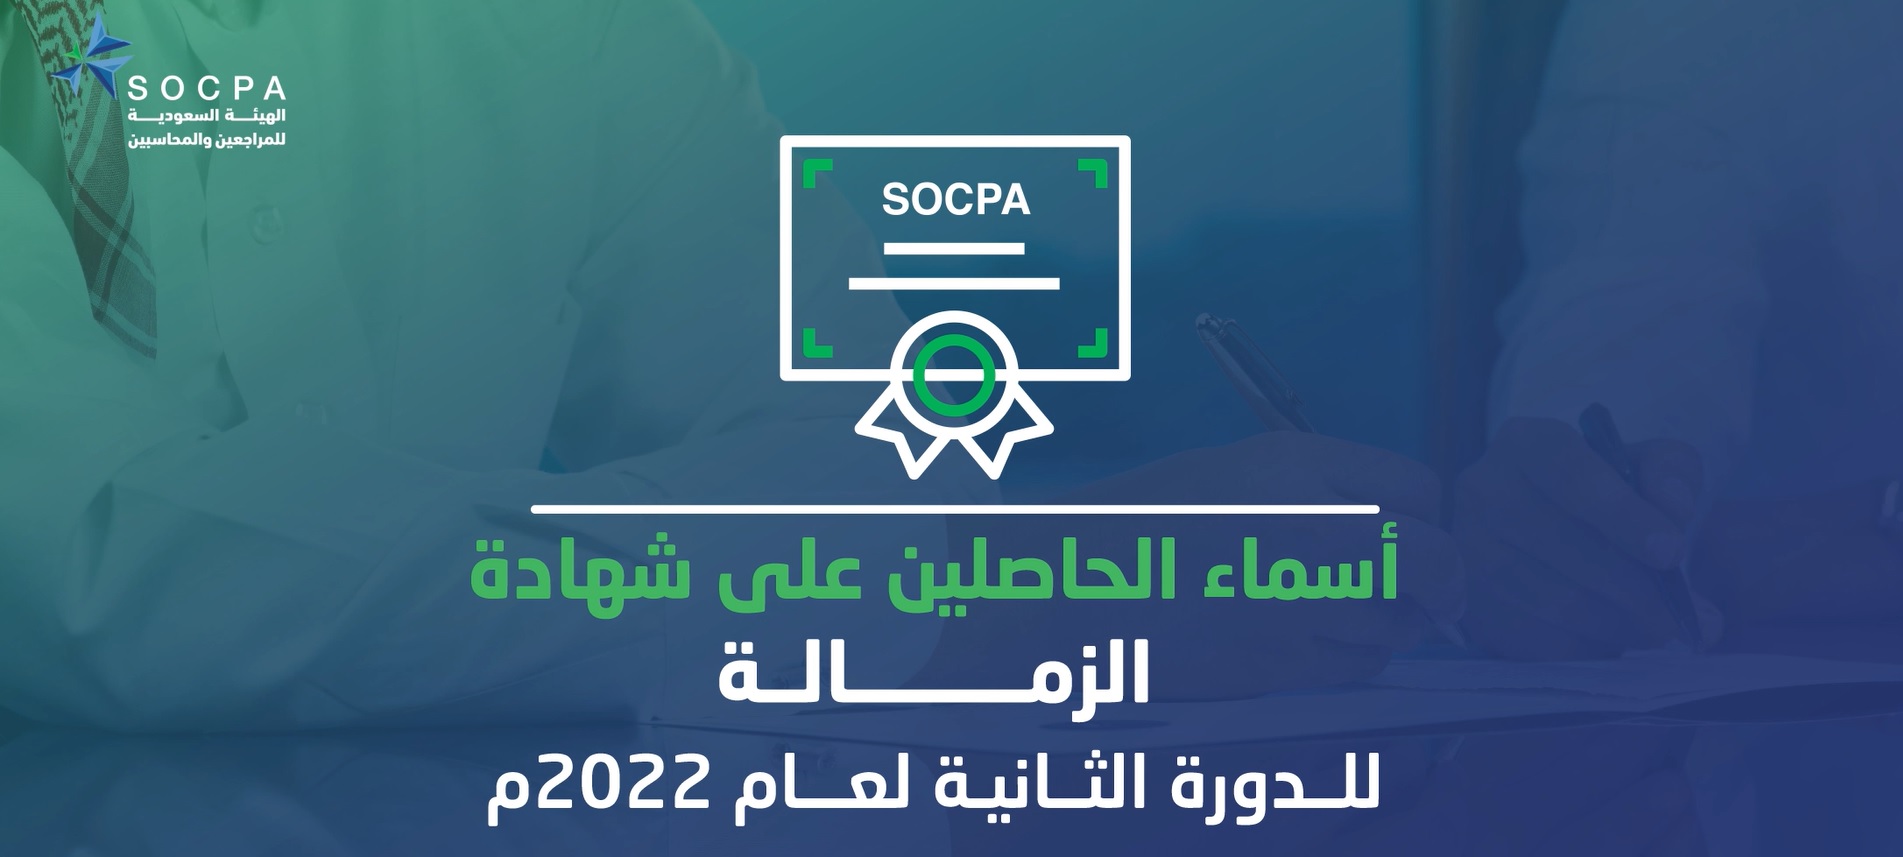 Names of new SOCPA fellowship holders for the second cycle of 2022